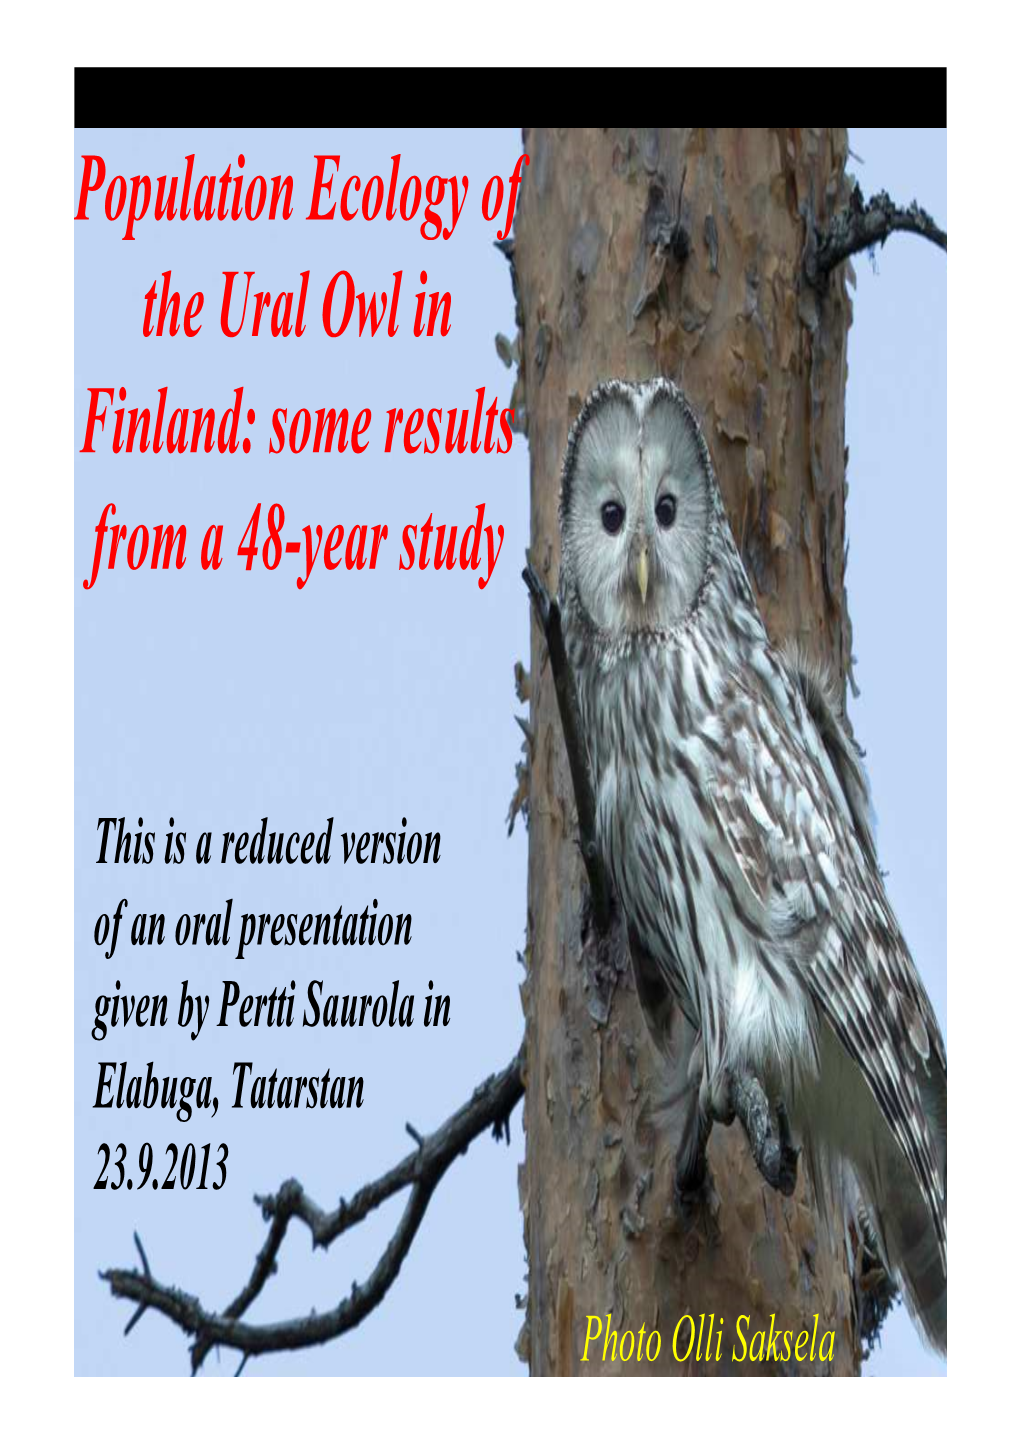 Population Ecology of the Ural Owl in Finland: Some Results from a 48-Year Study